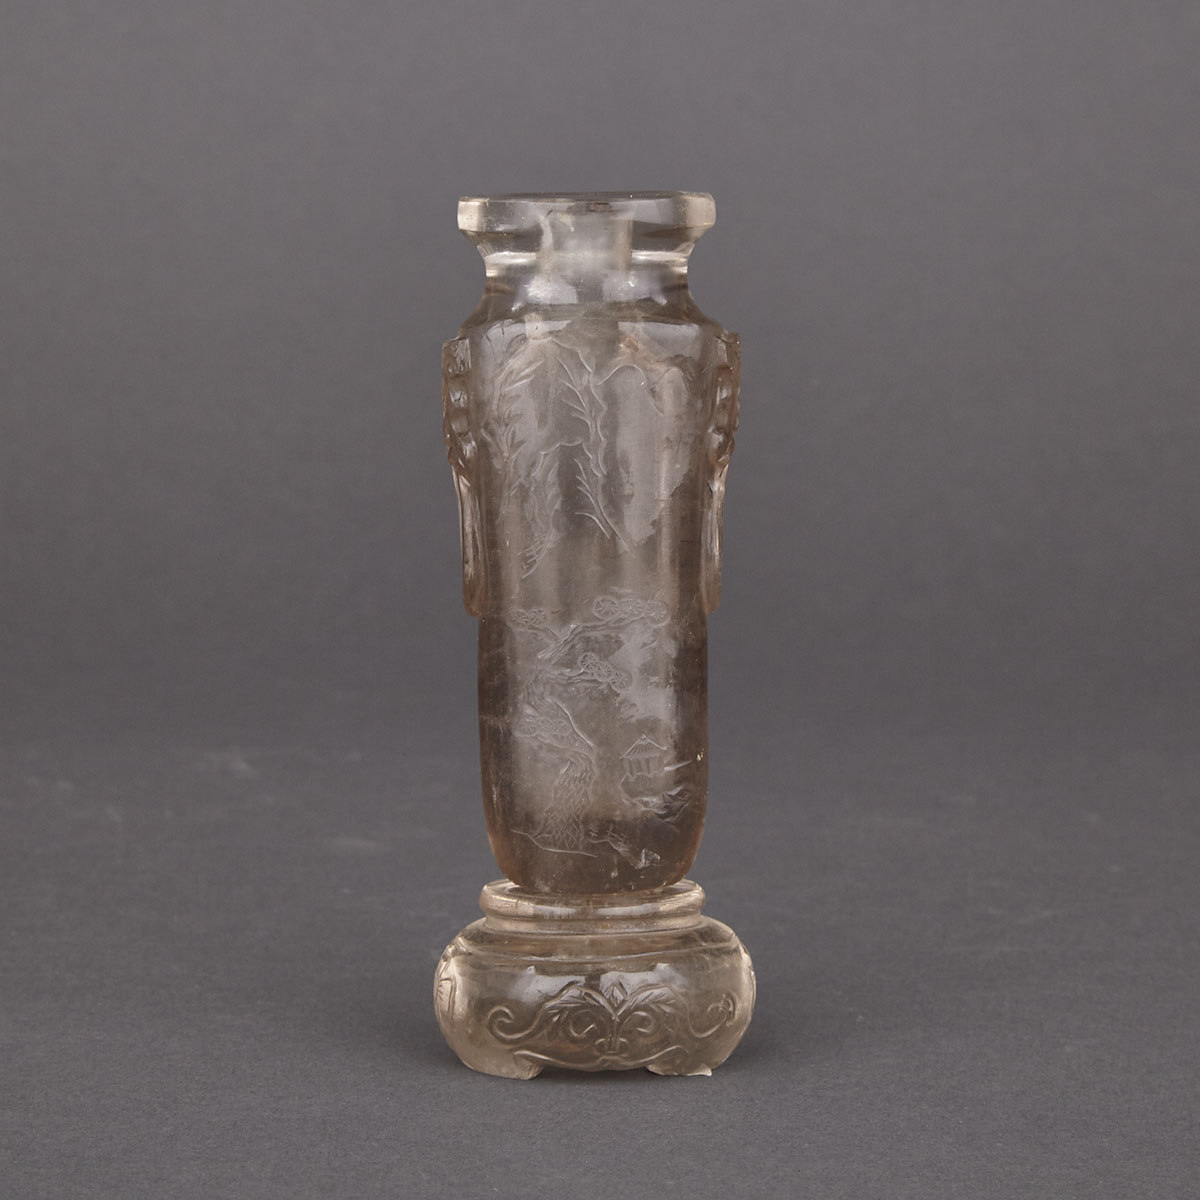 Small Chinese Rock Crystal Vase, early 20th century